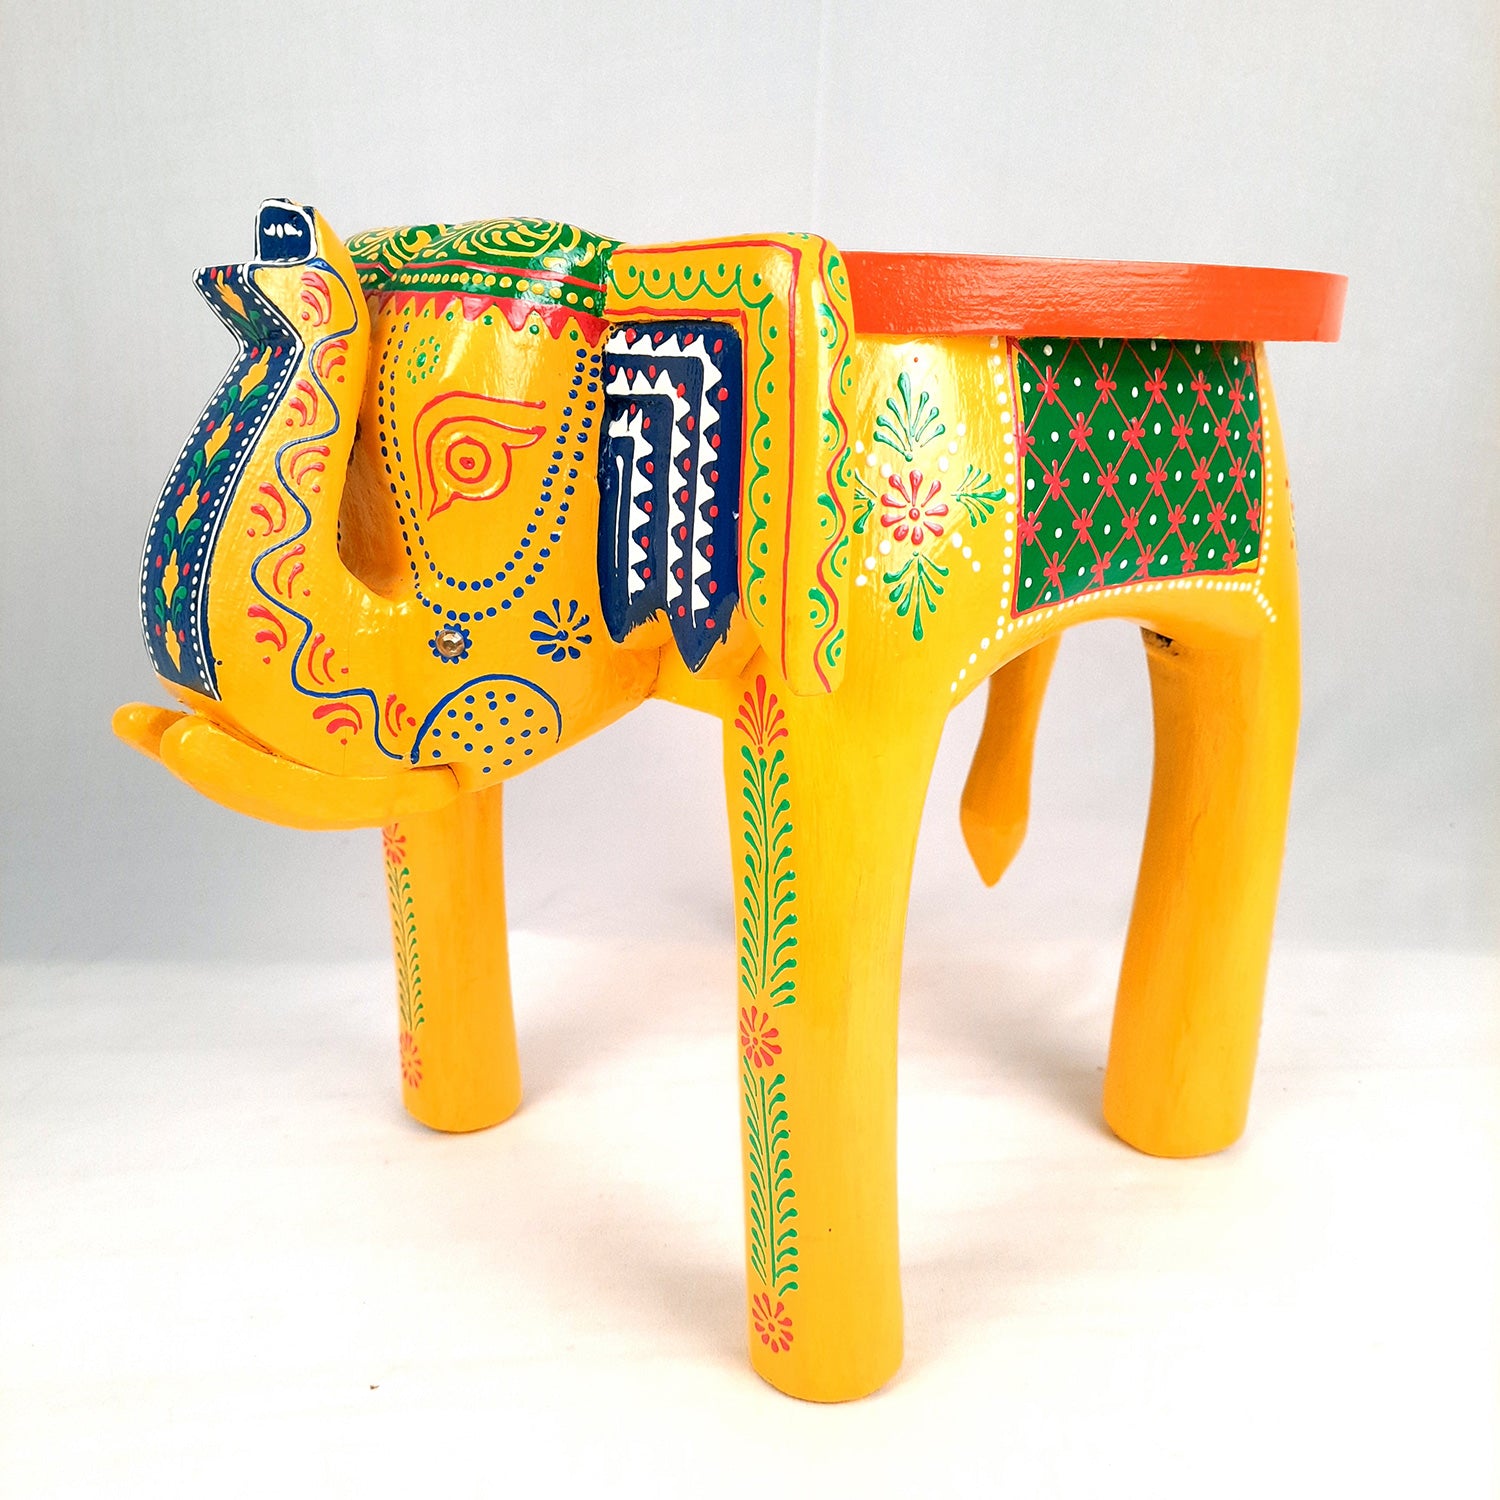 Side Table Cum Stool - Elephant Design | Wooden Stools for Keeping Lamp, Vases & Plants - for Home Decor, Corners, Sofa Side Stool, Office & Gifts - 12 Inch - Apkamart #Color_Yellow